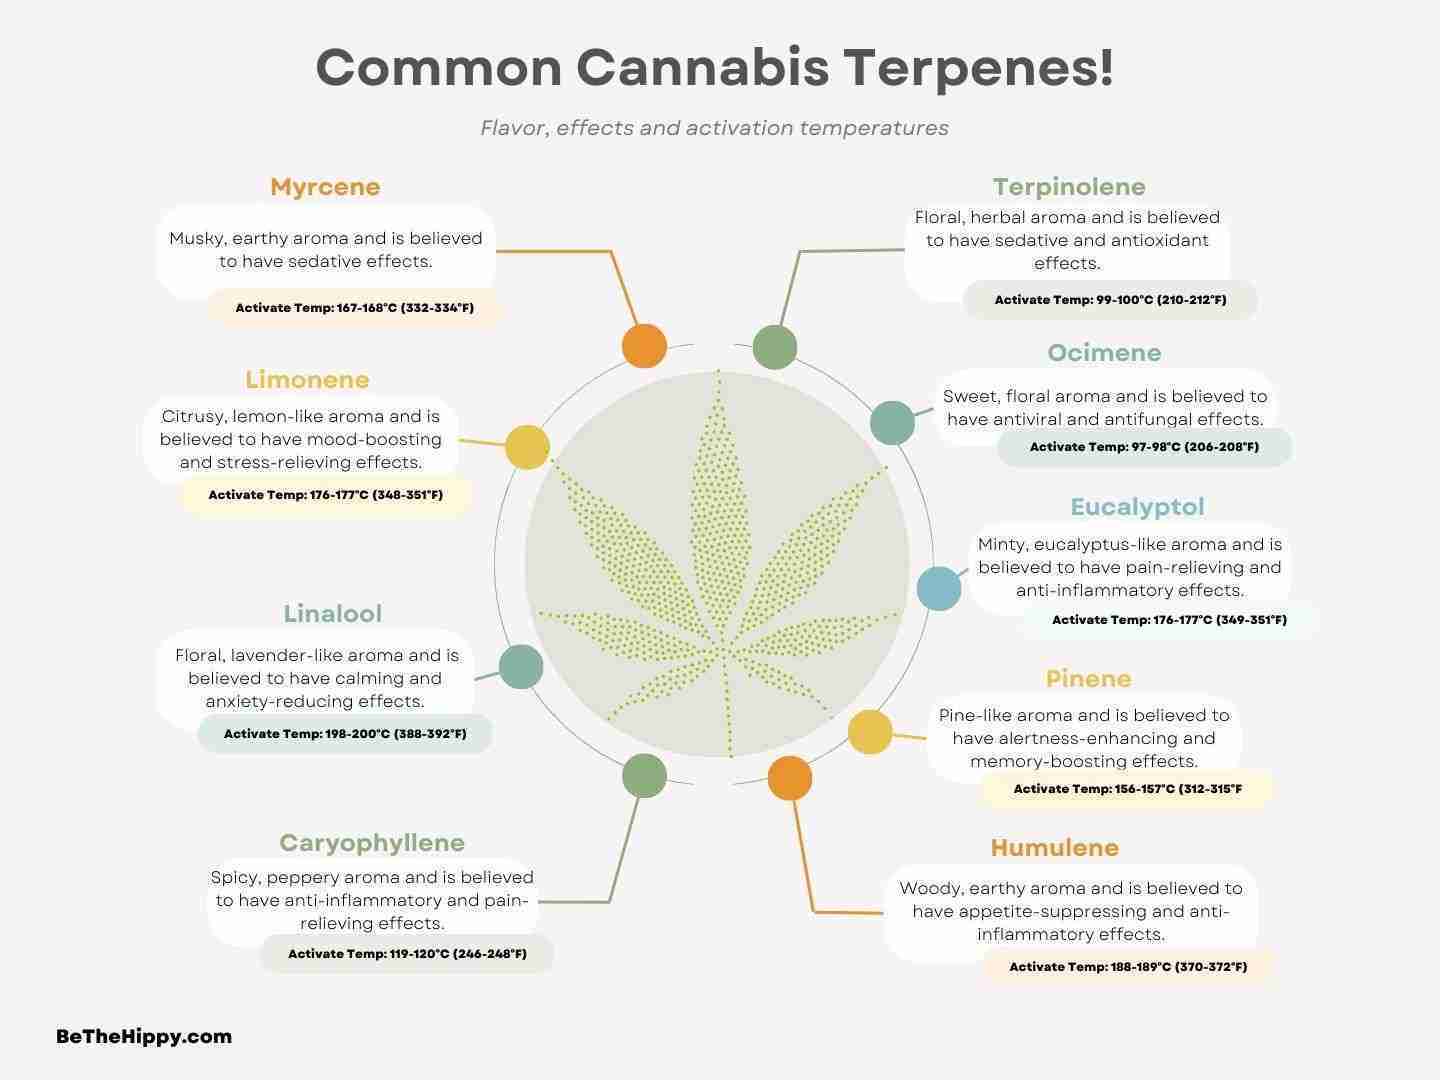 Cannabis terpenes flavors and effects on body